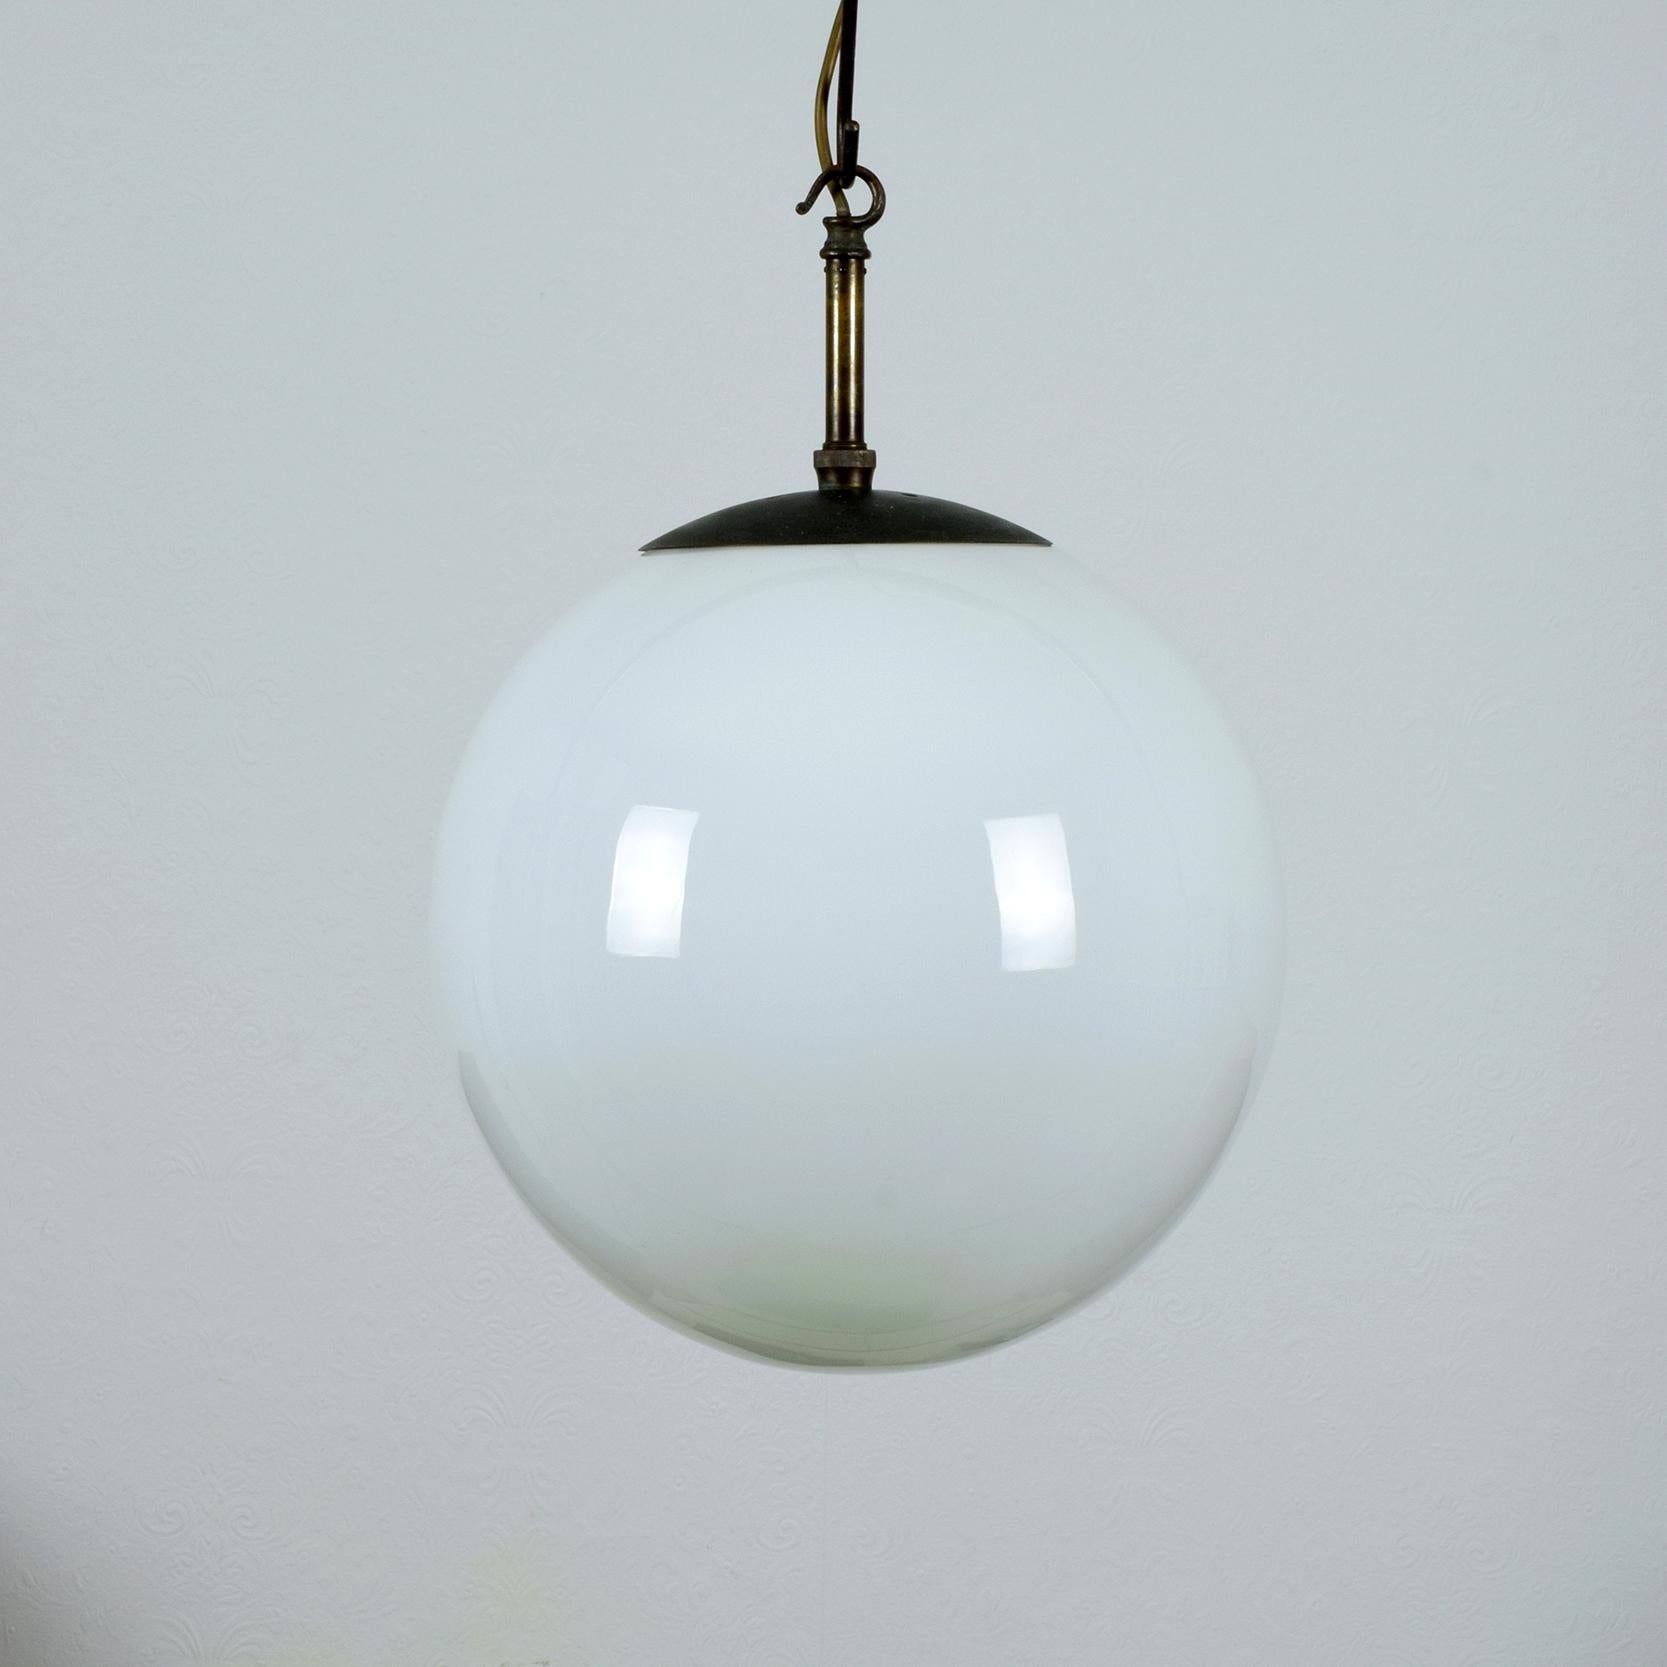 Beautiful 1920s white opaline glass globe pendant lamp.
Heavy high quality aged and patinated brass fittings.

Provenance: Hove Museum & Art Gallery, Brighton and Hove City, UK. The lamp dates from when the Museum was opened in 1927.

The lamp